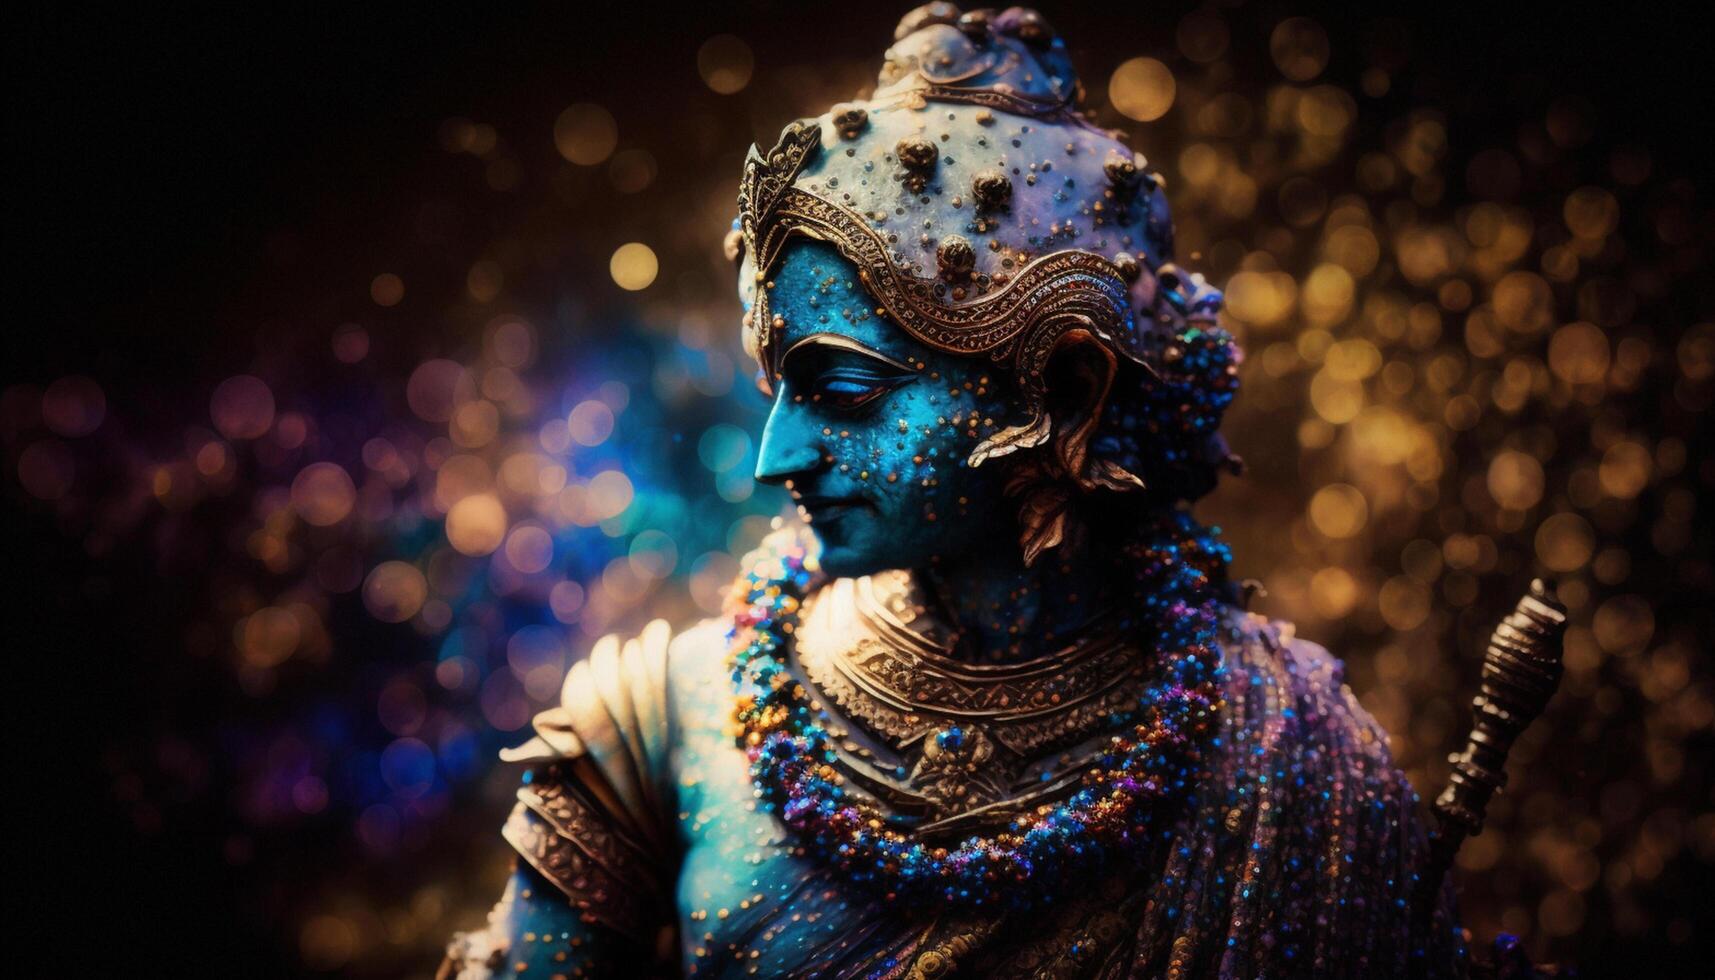 Serene Portrait of Lord Krishna, the God of Love and Compassion photo